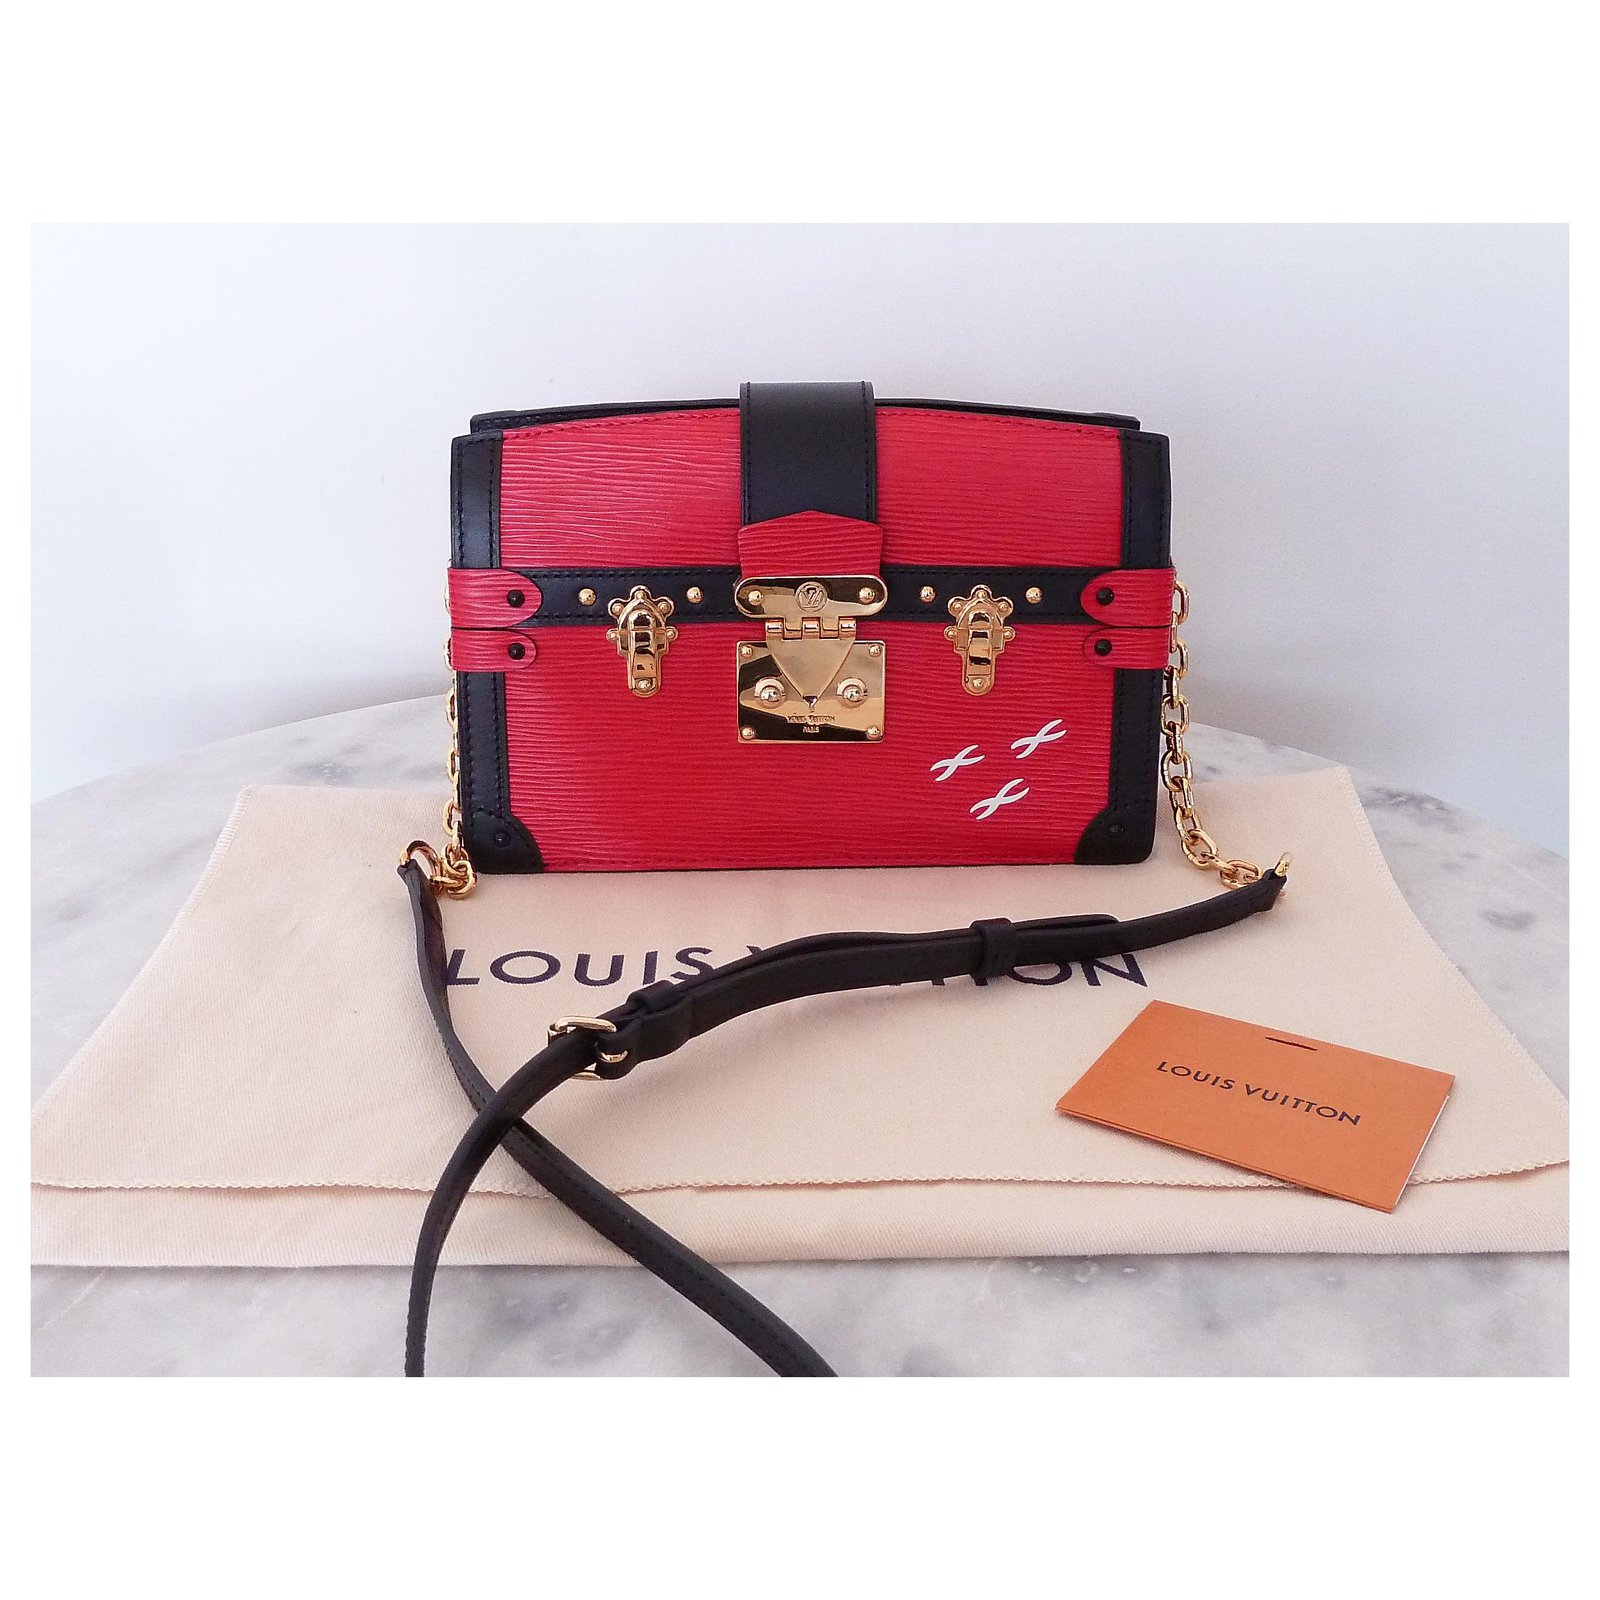 LOUIS VUITTON Epi Leather Trunk Clutch Gold Buckle Chain Shoulder Bag Red